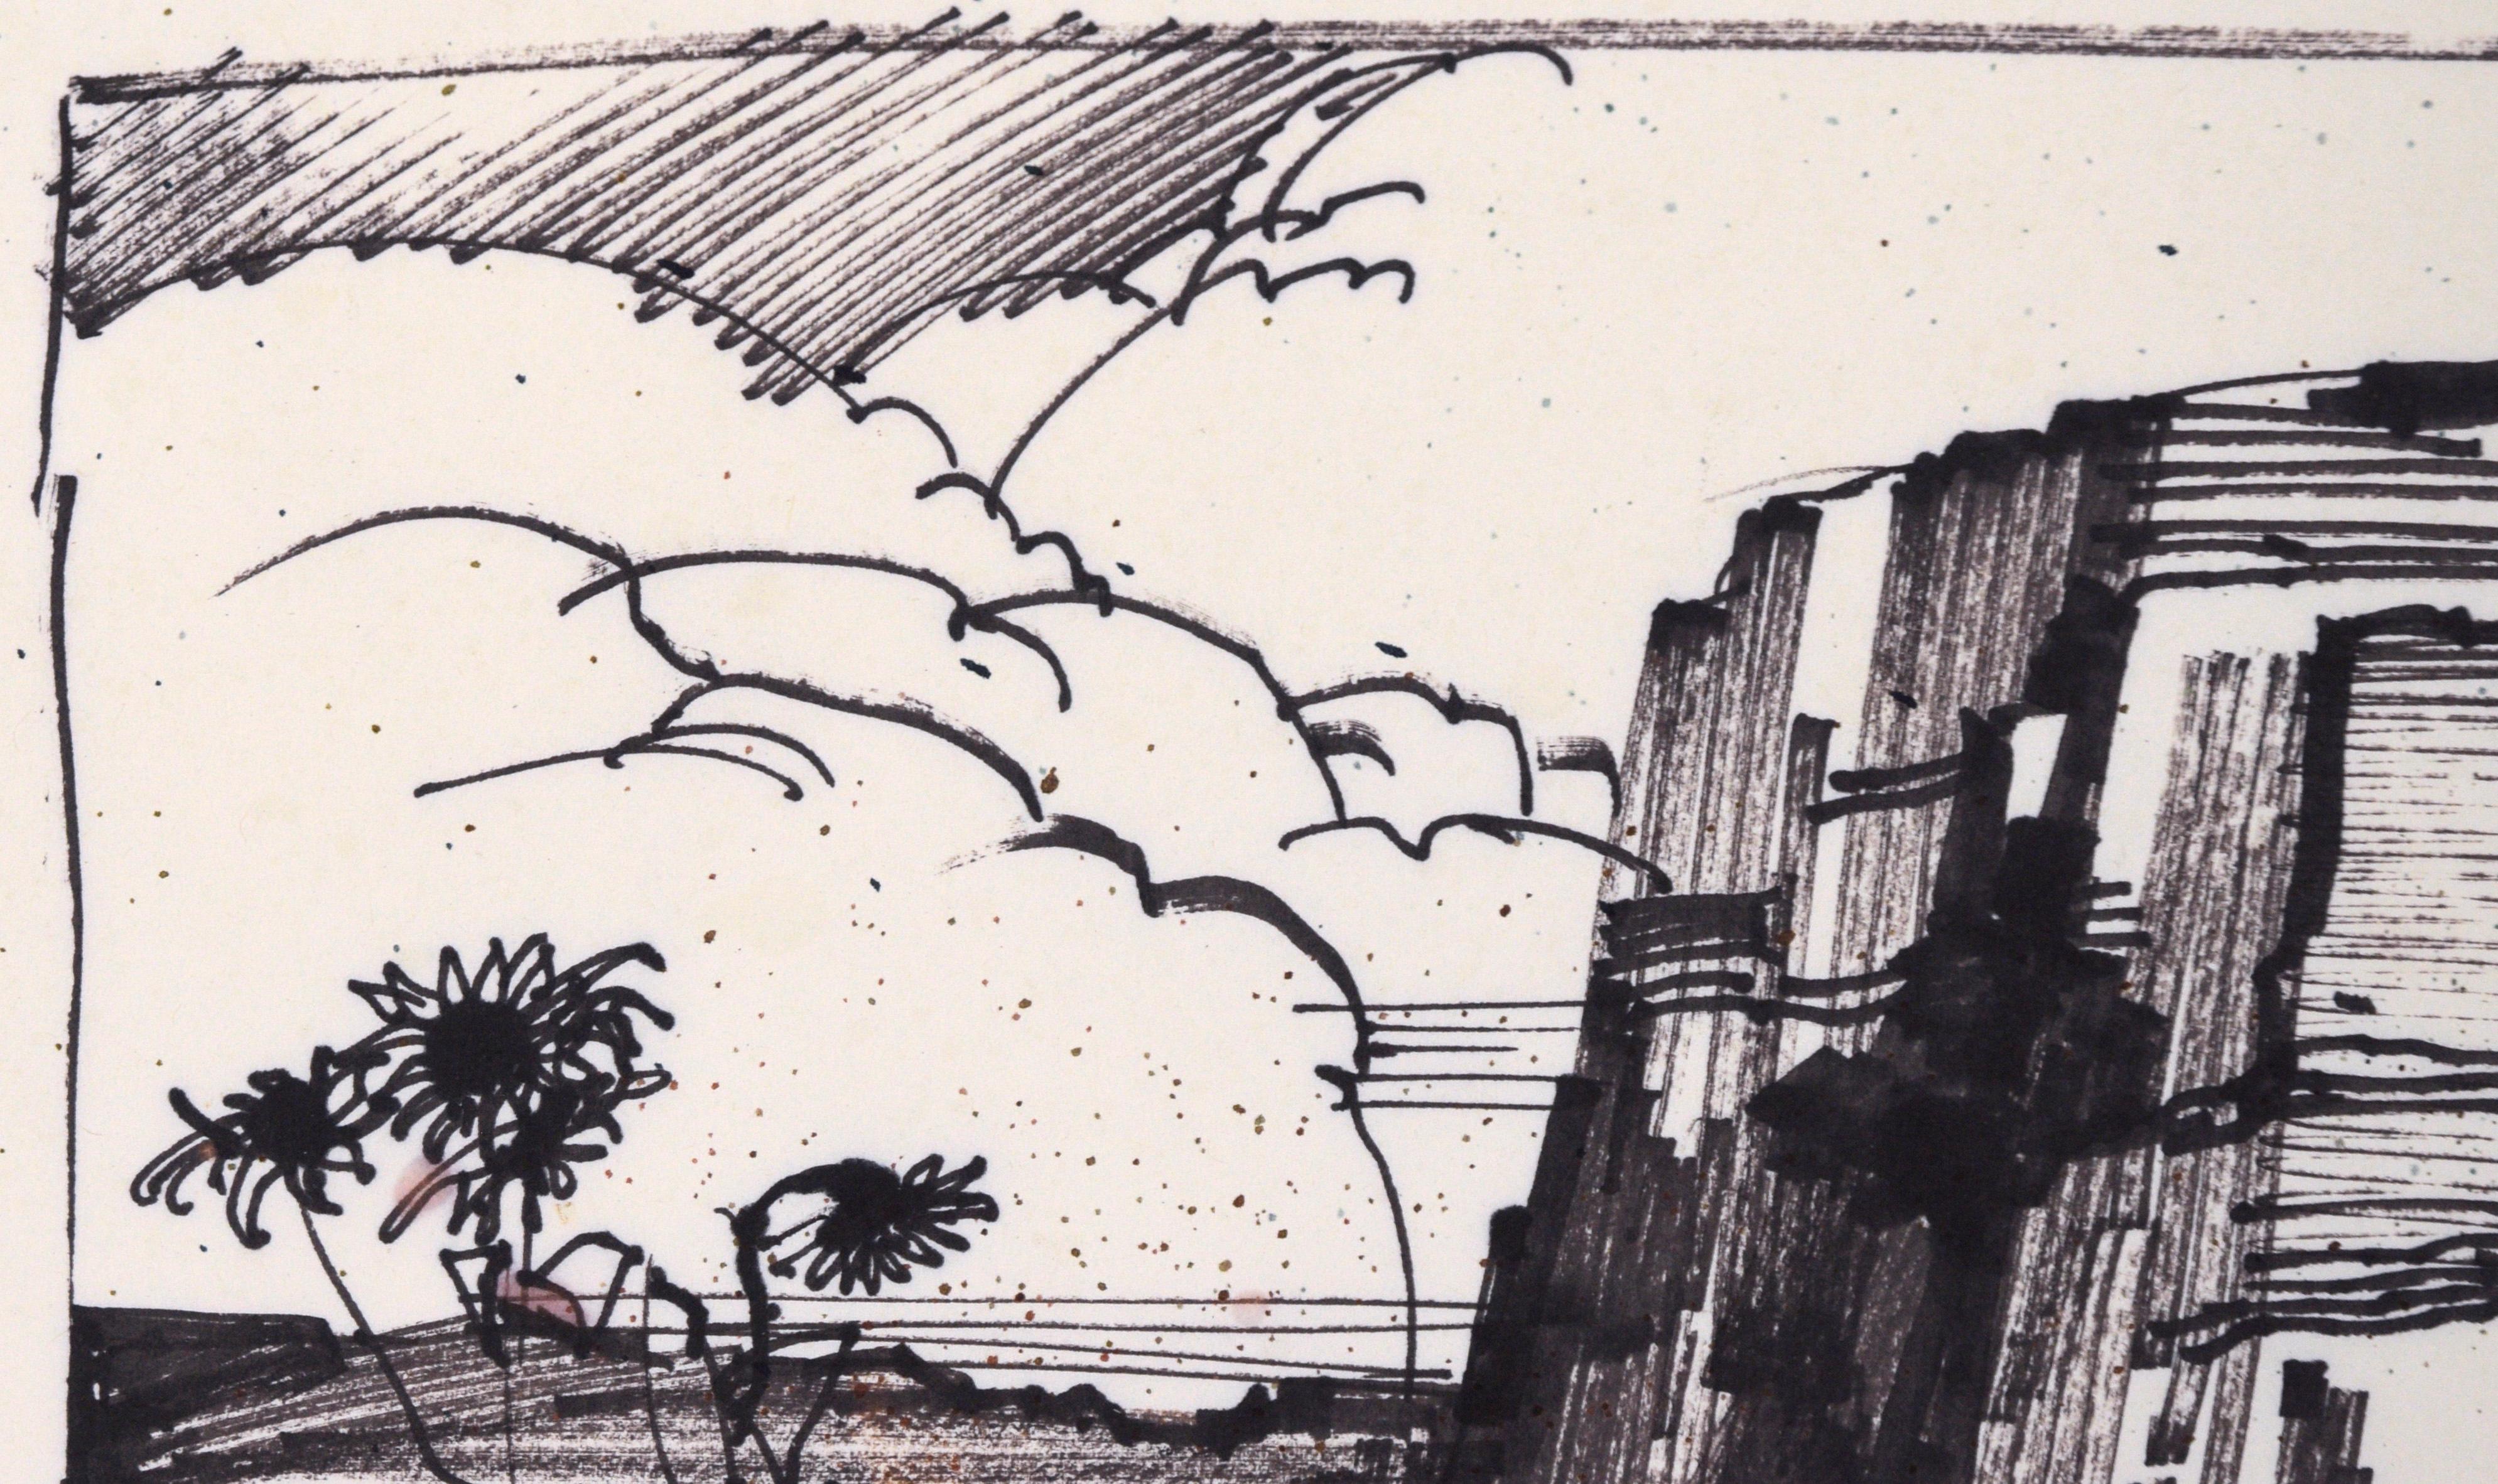 Desert Sunflowers & Petroglyphs - Line Drawing Landscape in Ink on Paper - American Impressionist Art by Laurence Sisson